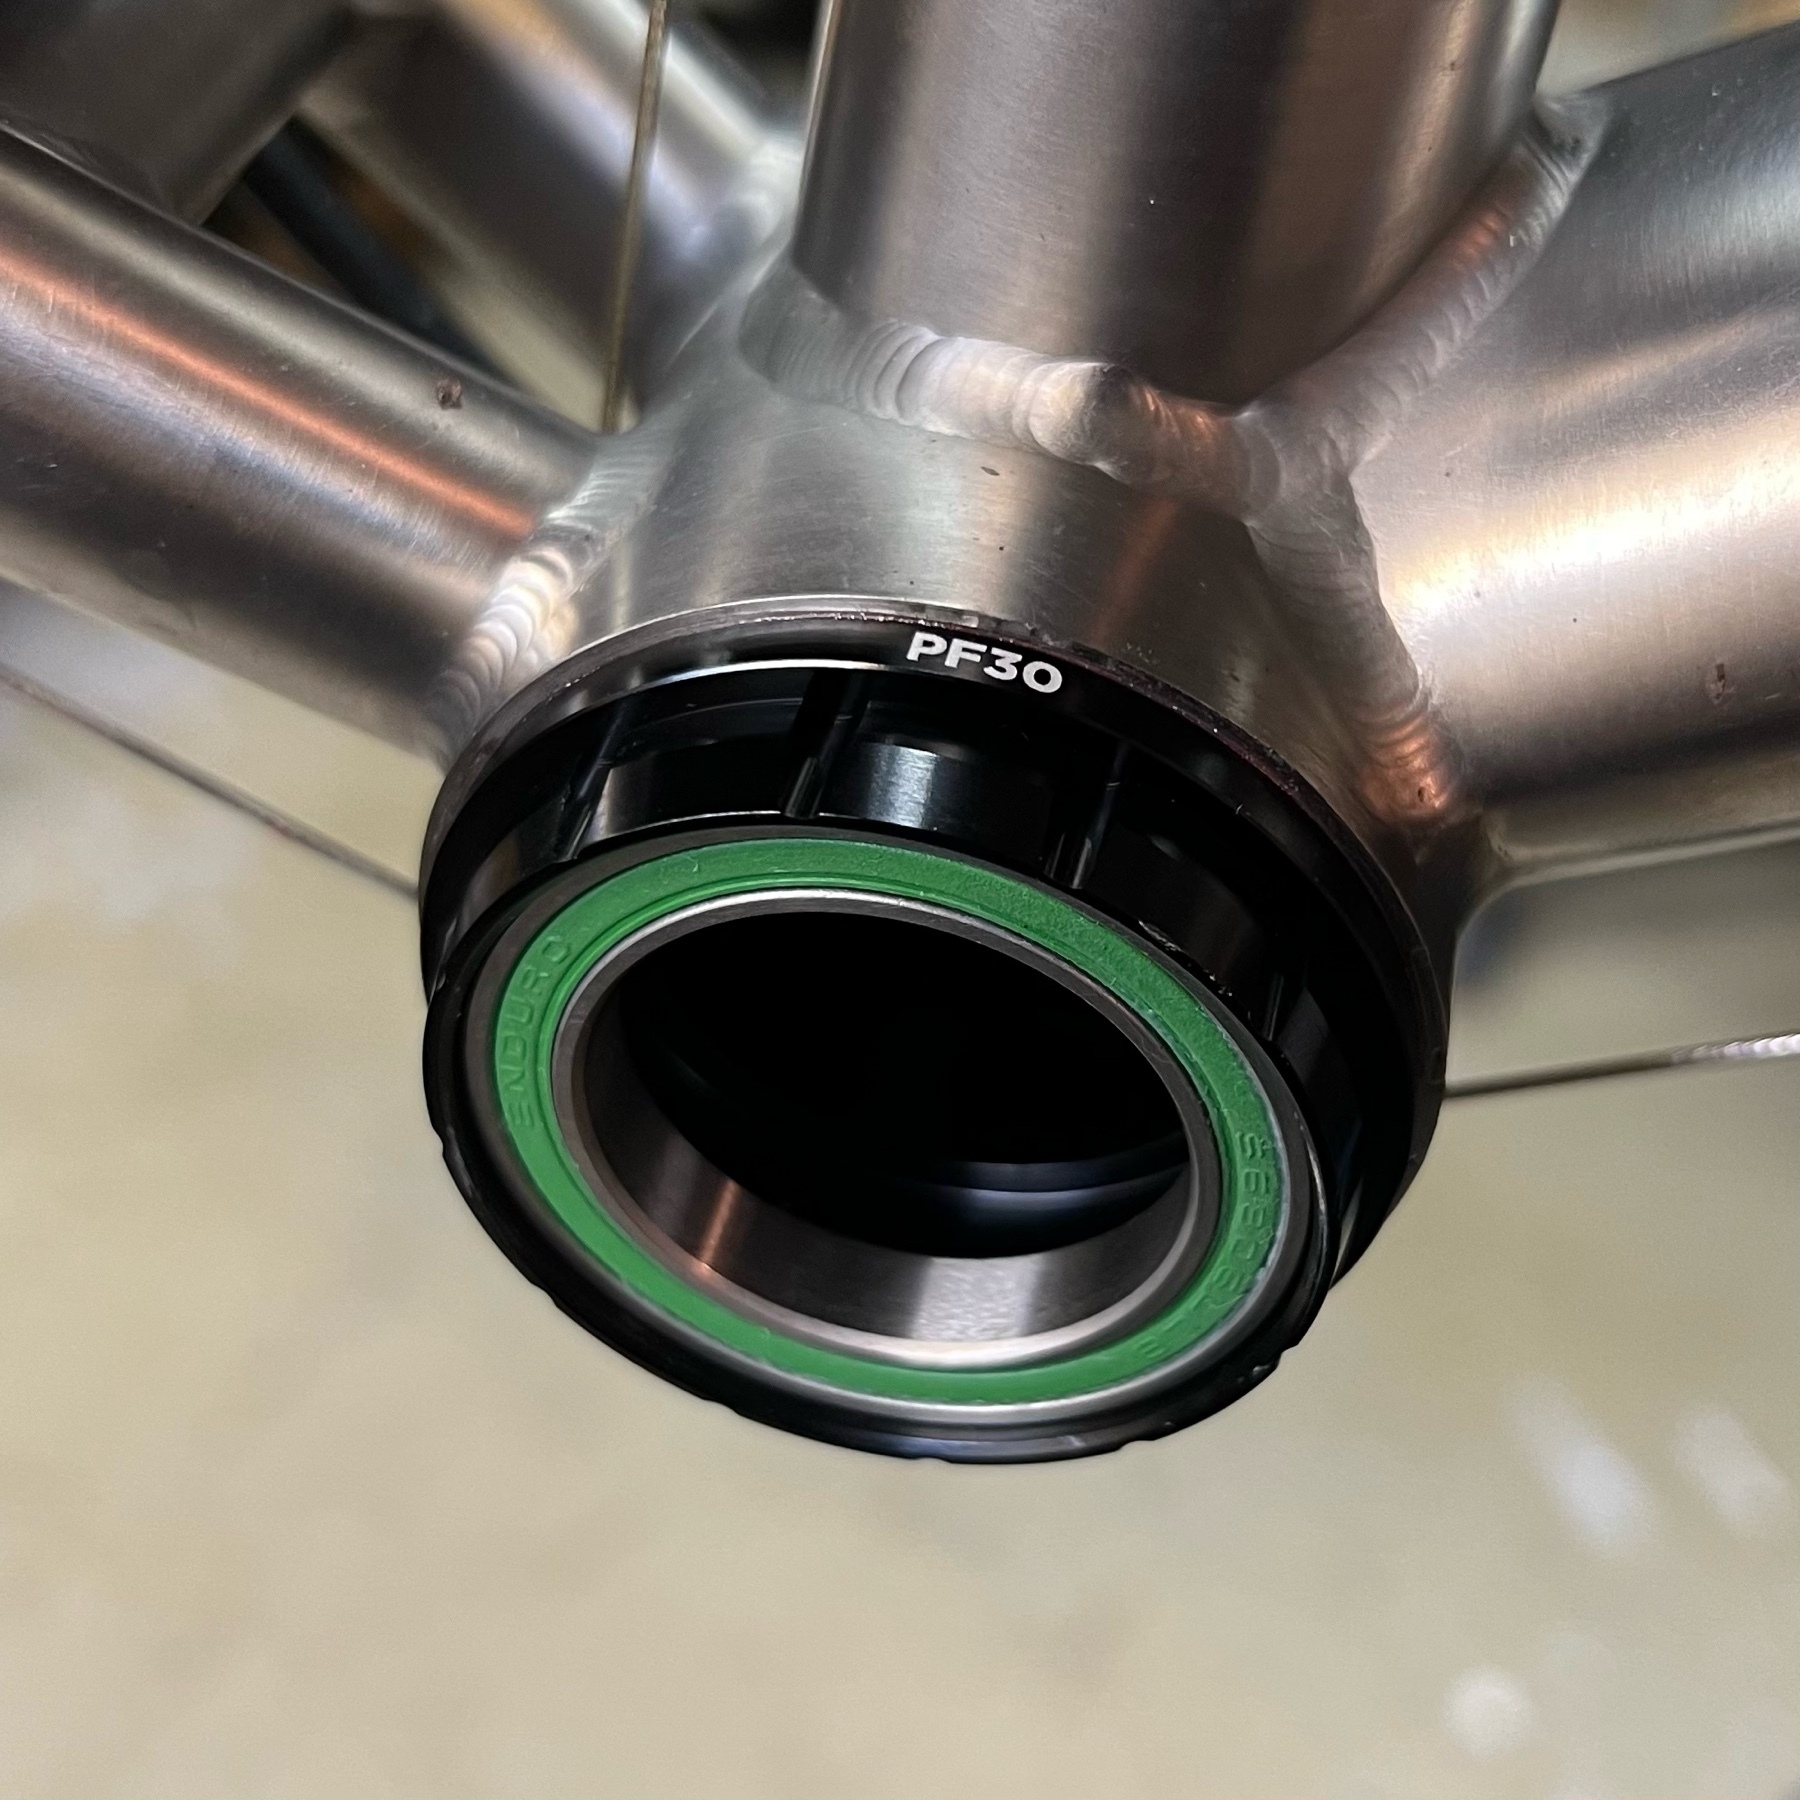 Black-anodised Cane Creek Hellbender 70 bottom bracket in a titanium bicycle frame. The green outer seal of the Enduro bearings are visible.